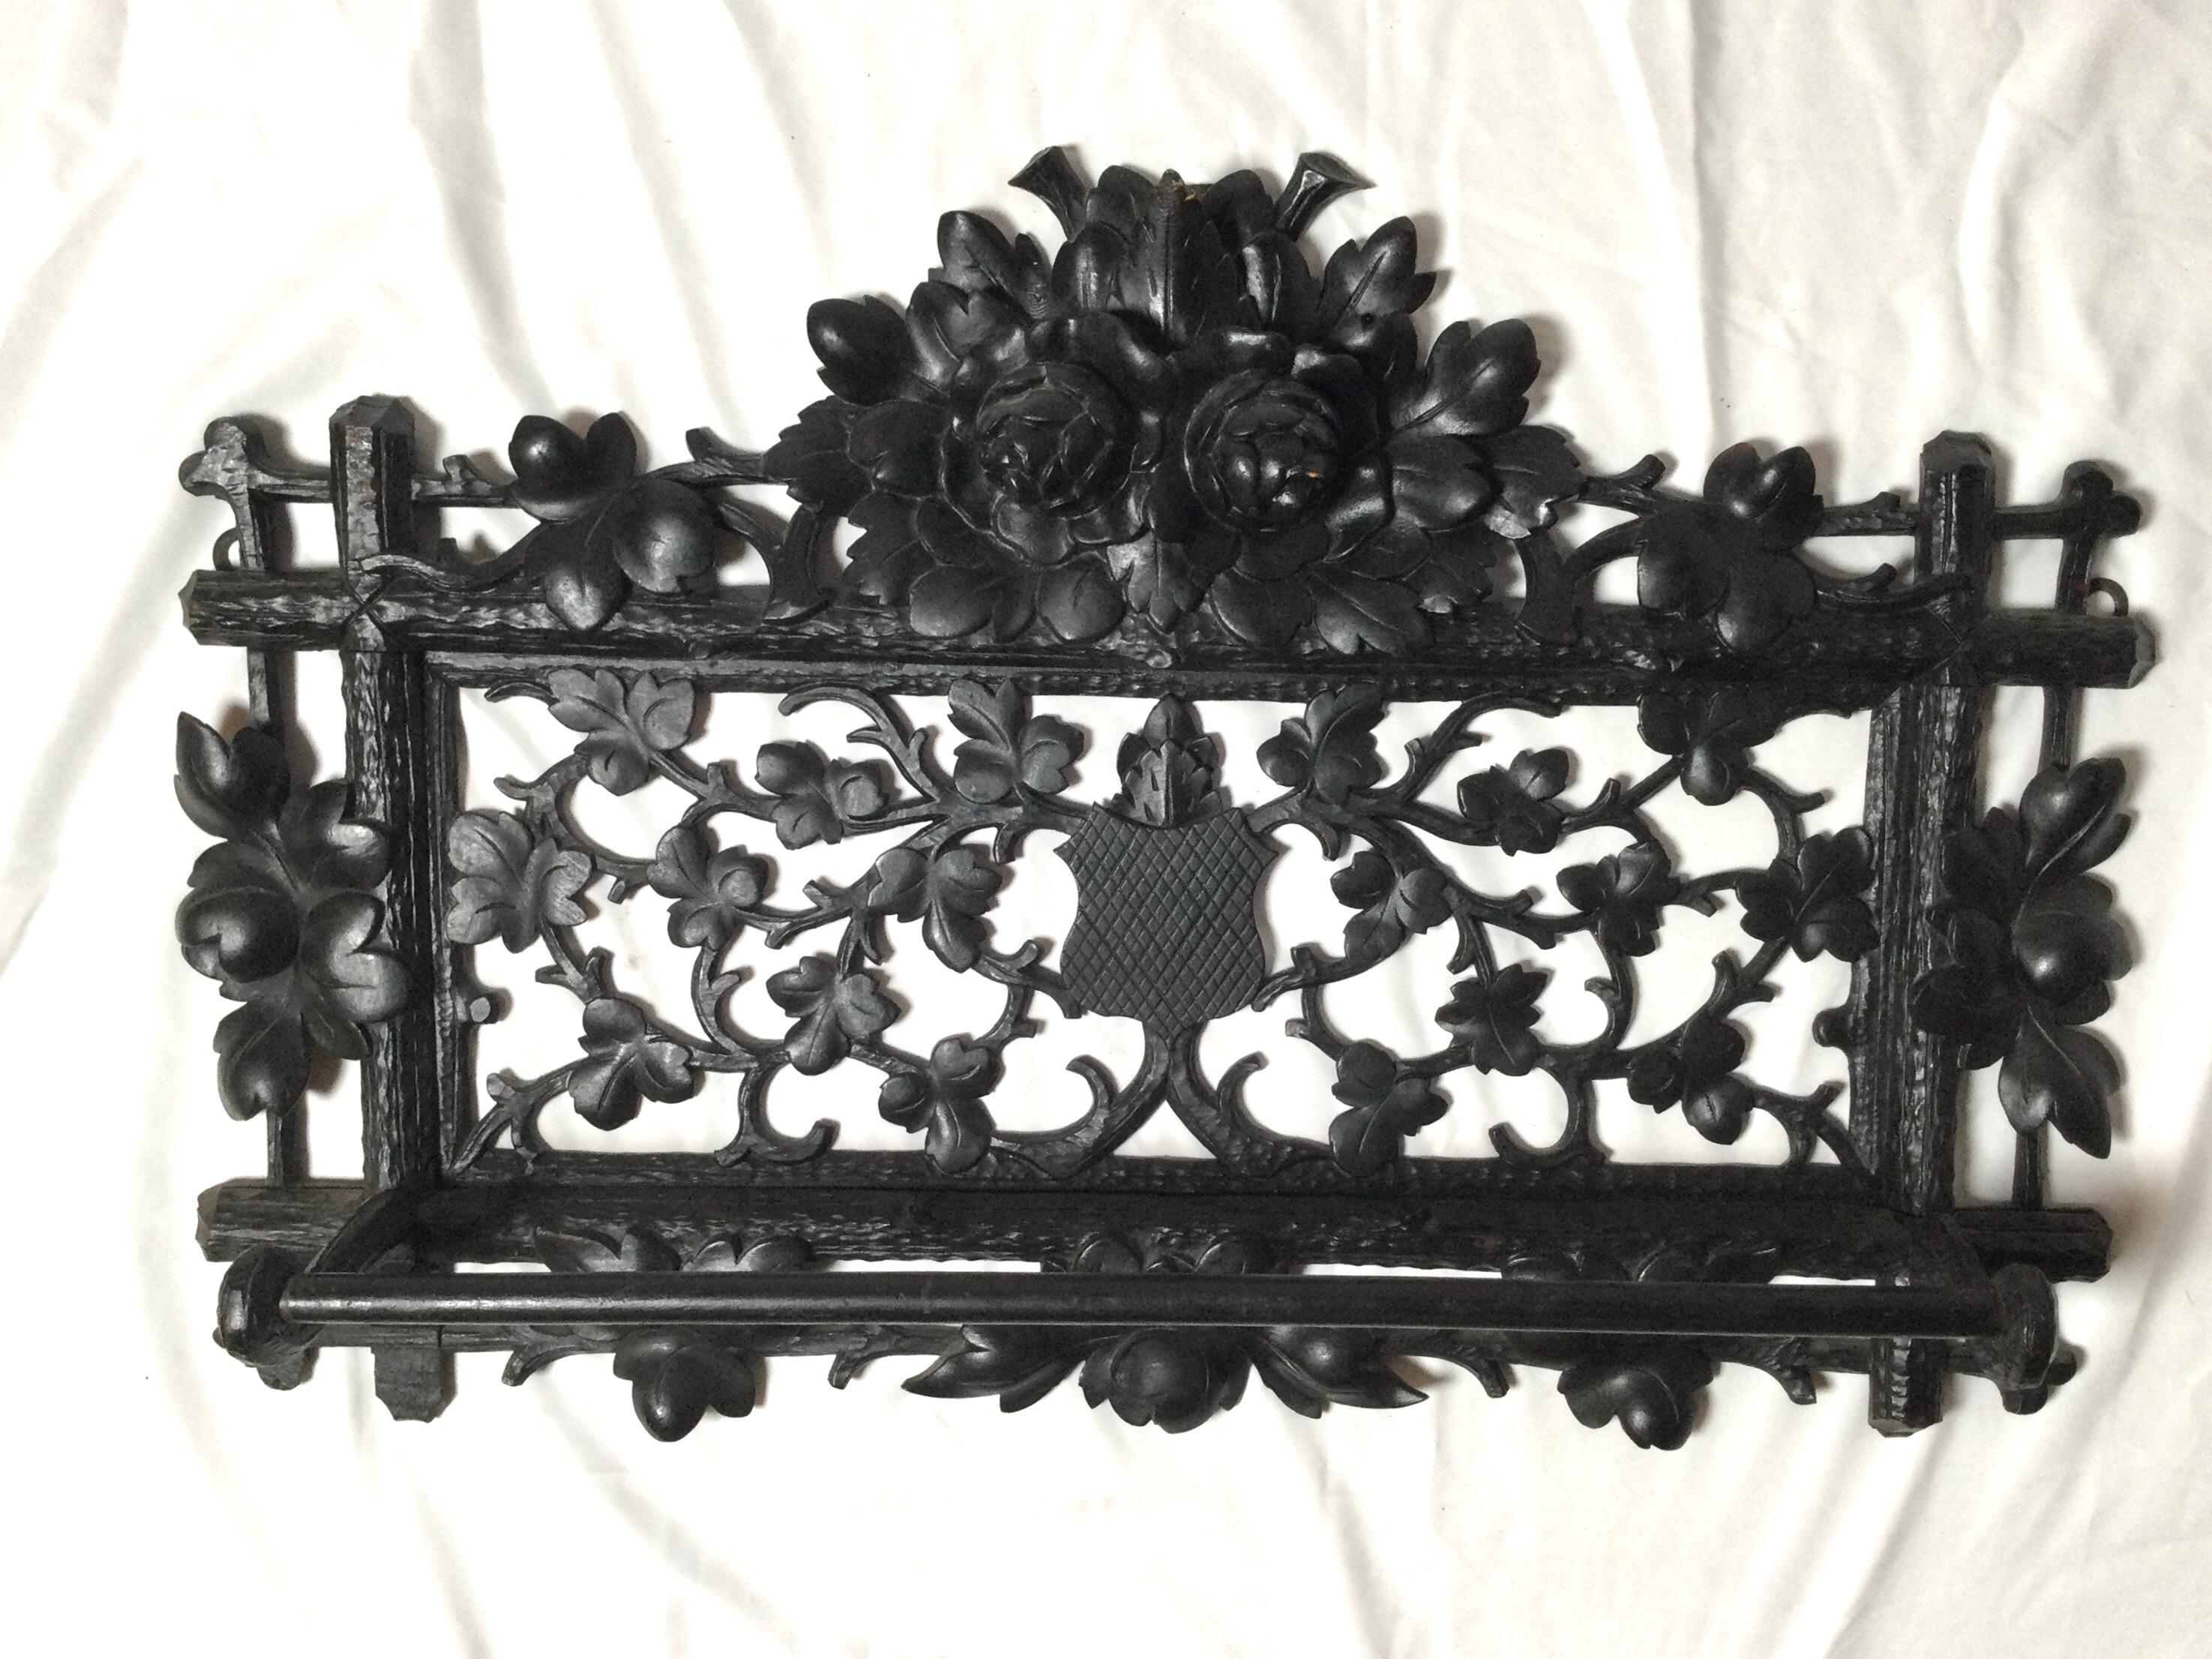 Beautifully carved black Forrest towel rack with hand carved and pierced back plate. The typical classic design with leaves, vines and center sheild.